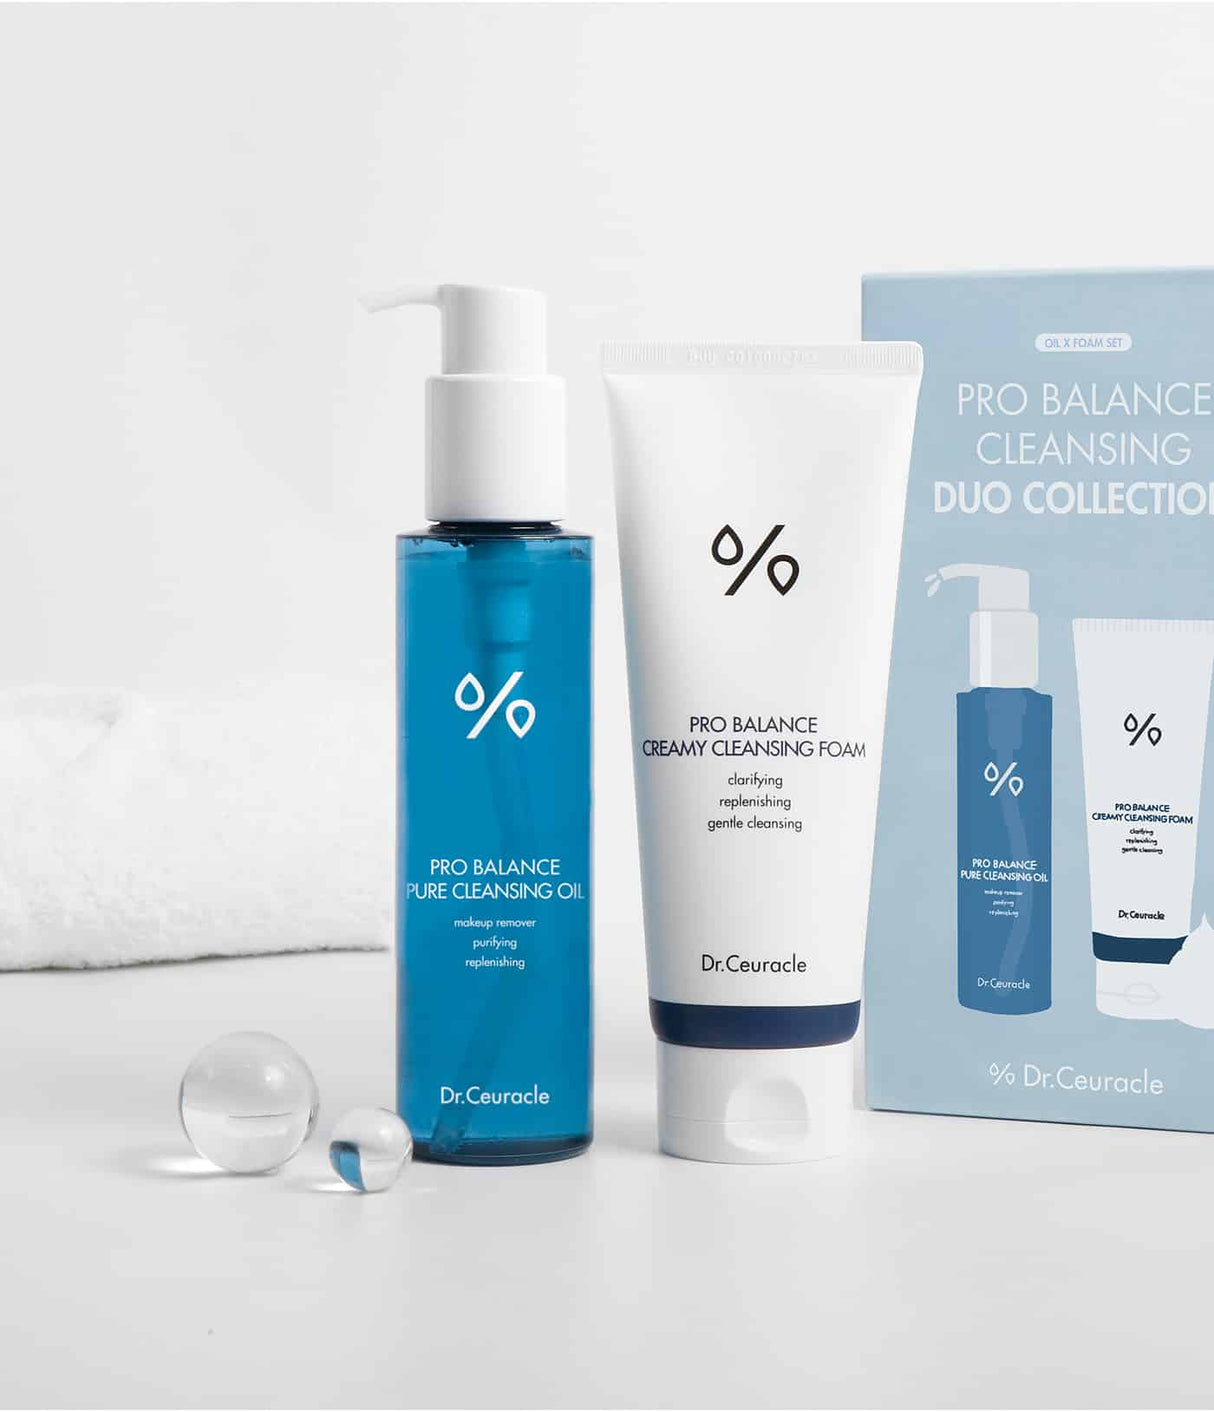 Pro Balance Cleansing Duo Collection de Dr. Ceuracle